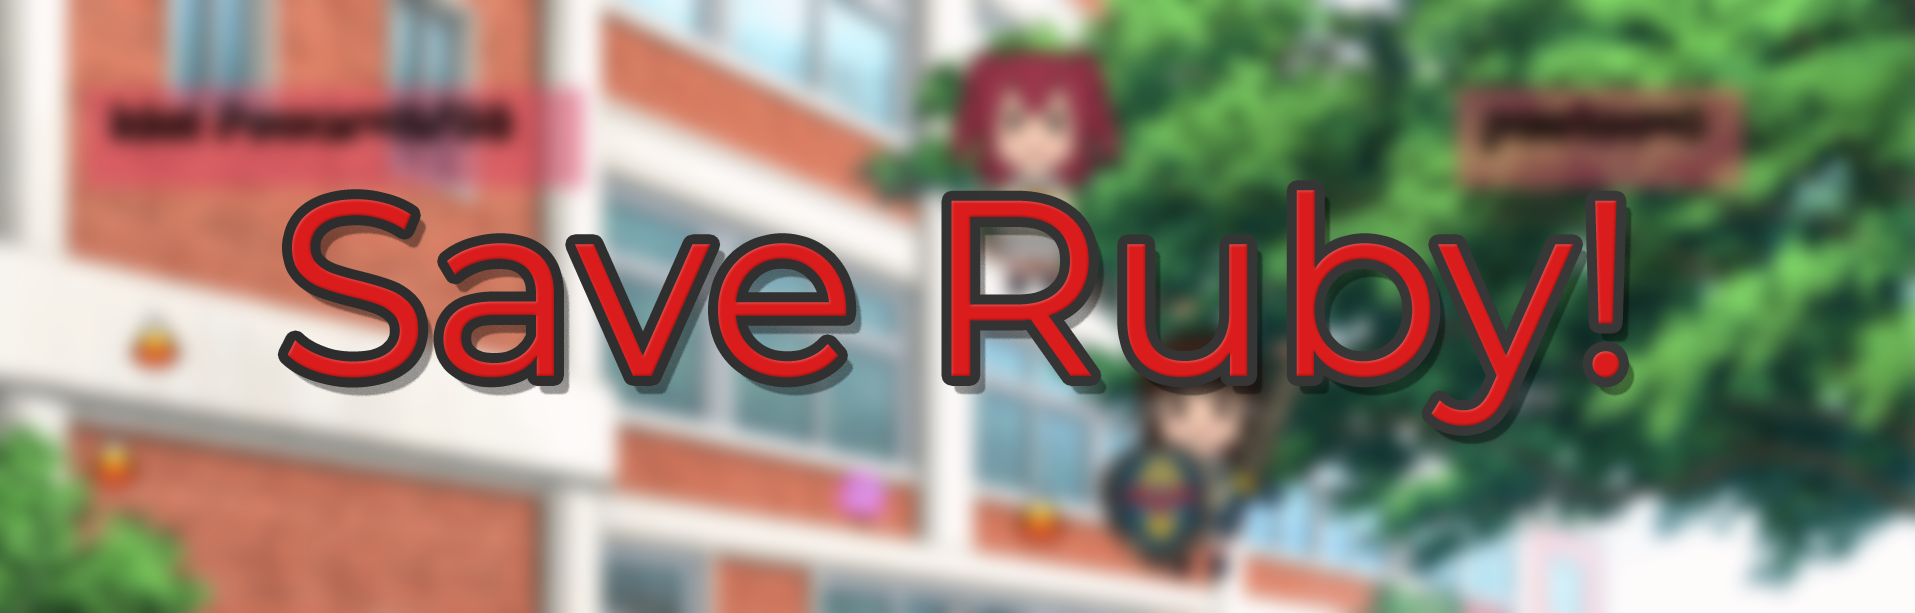 Save Ruby!